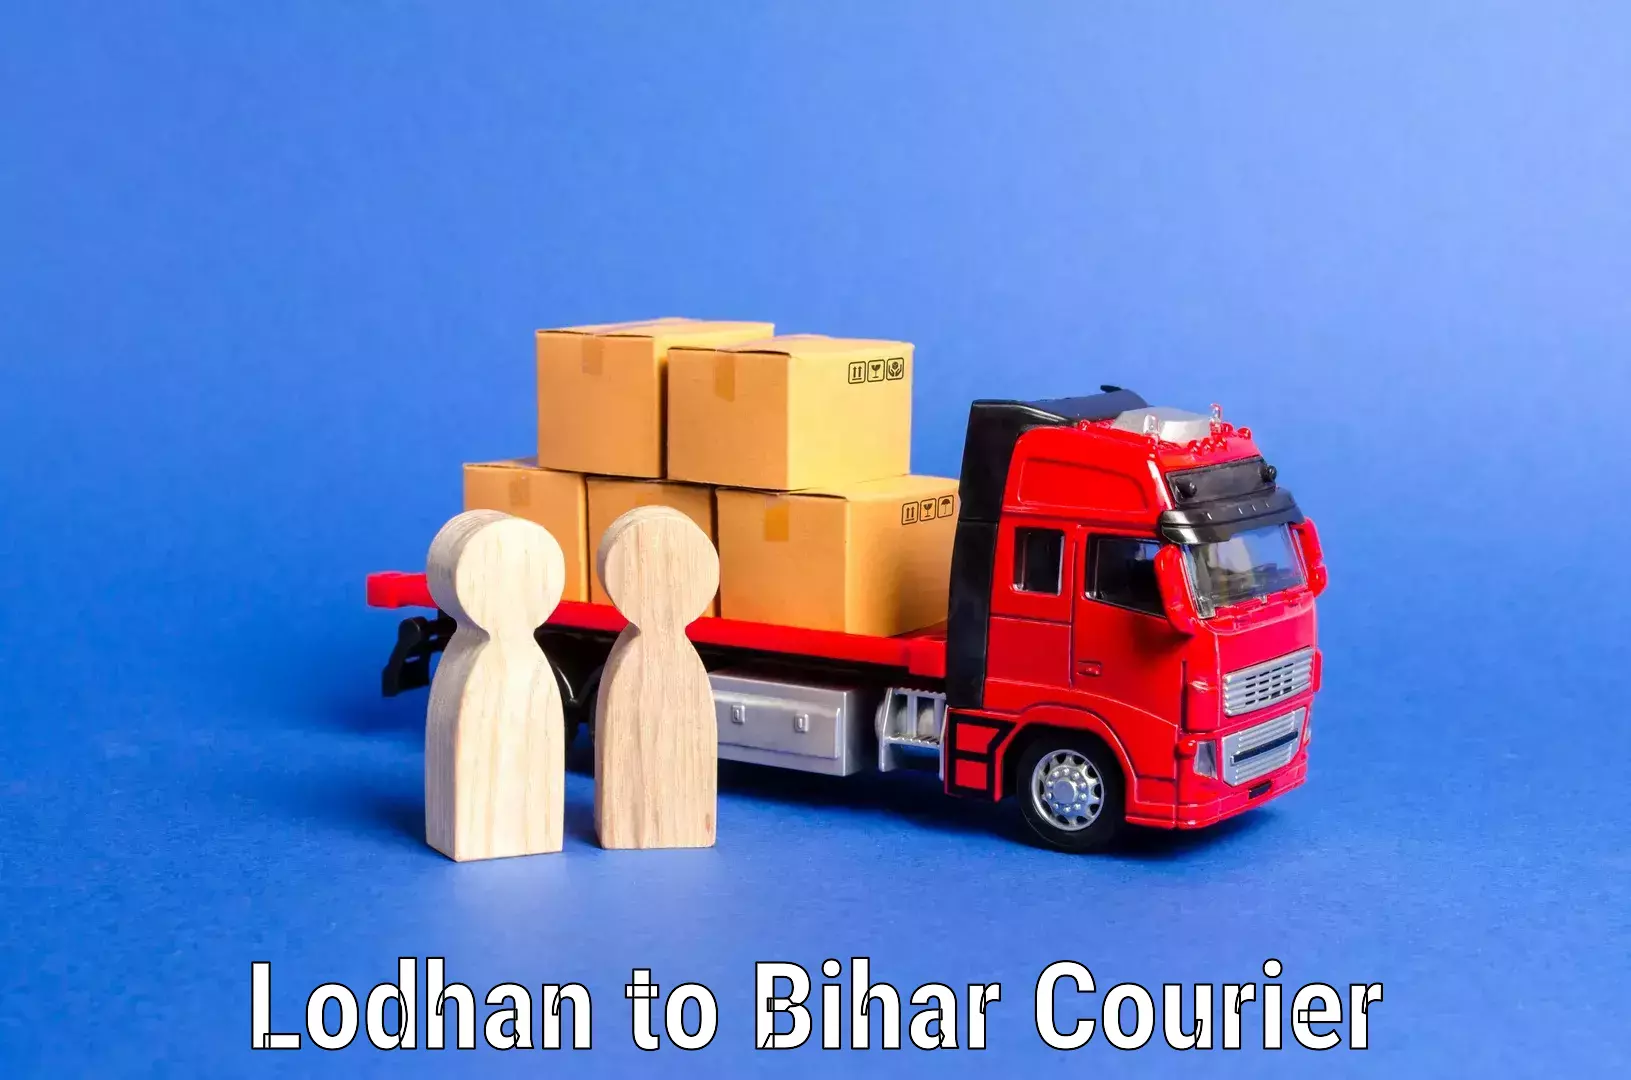 Affordable moving services Lodhan to Bihar